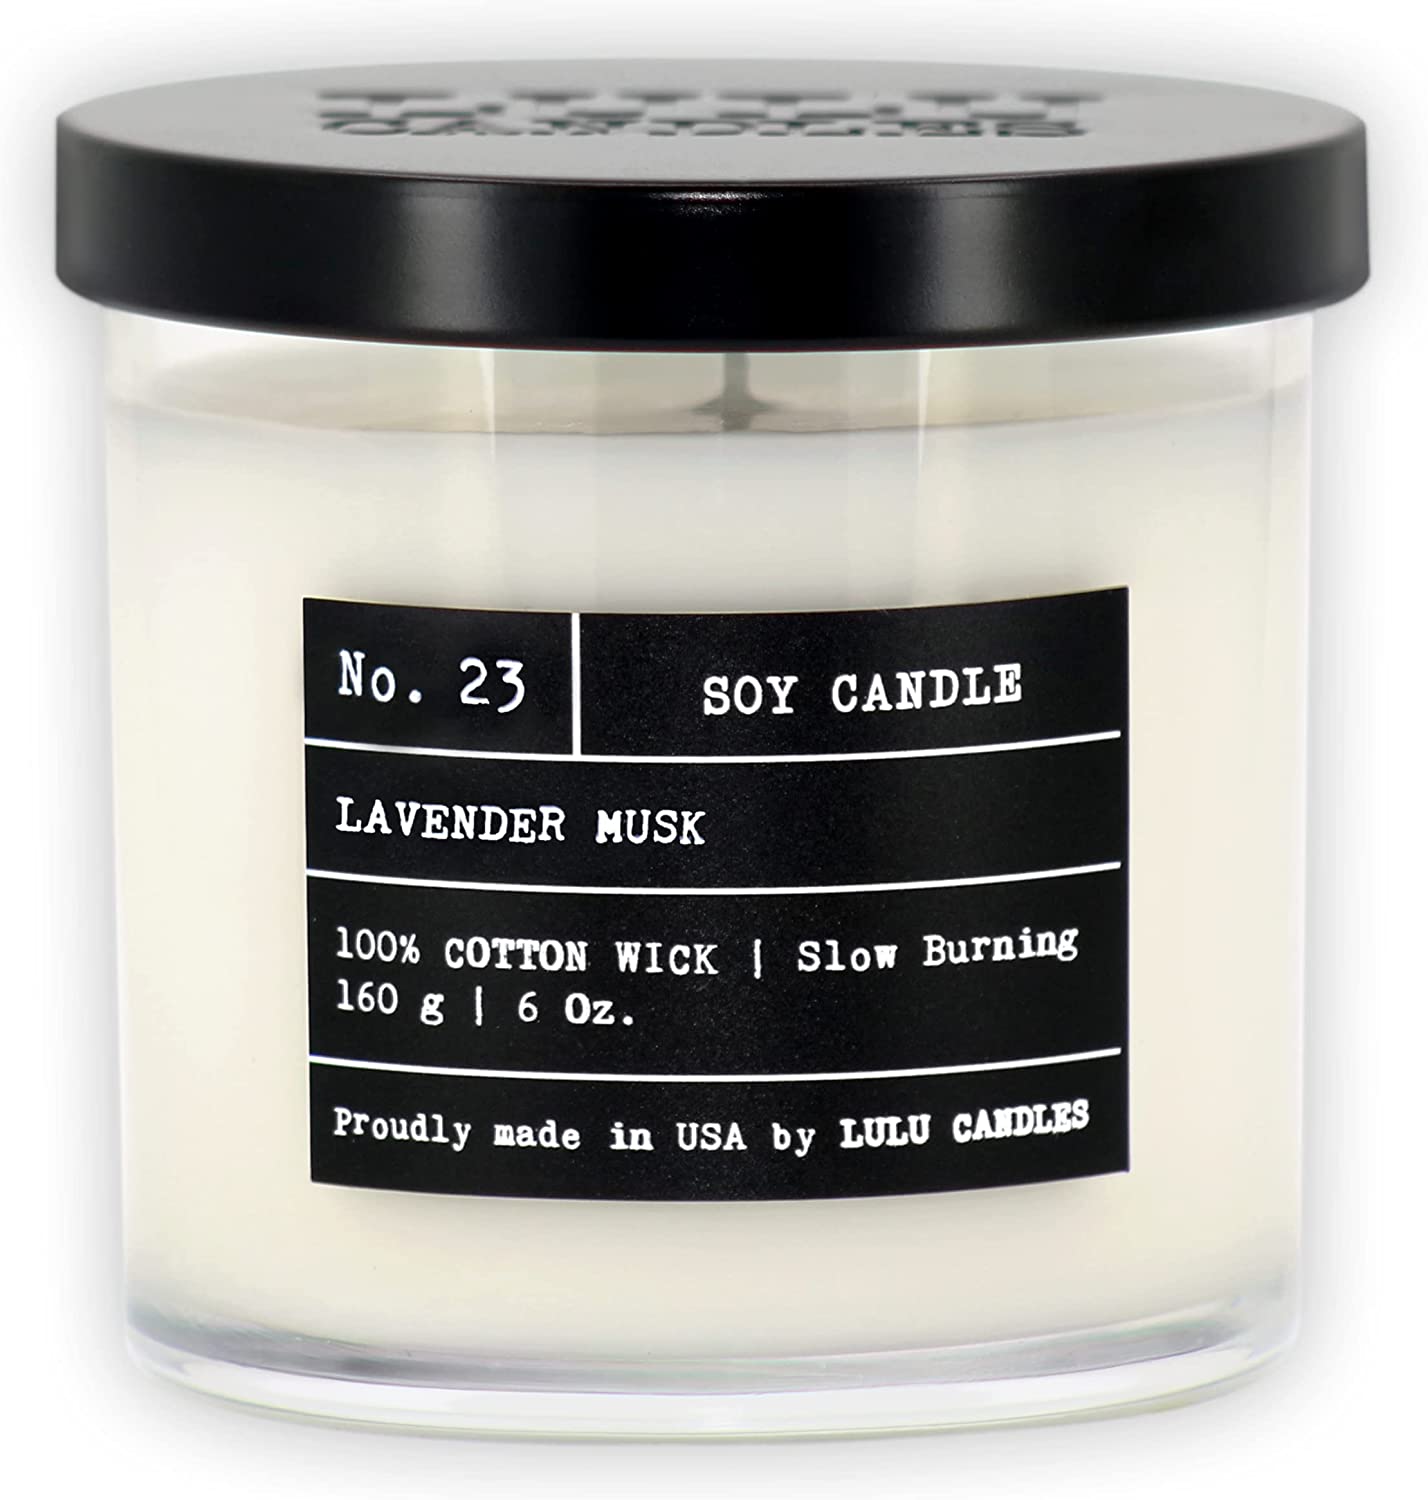 Lulu Candles Cotton Wick Slow-Burning Scented Candle